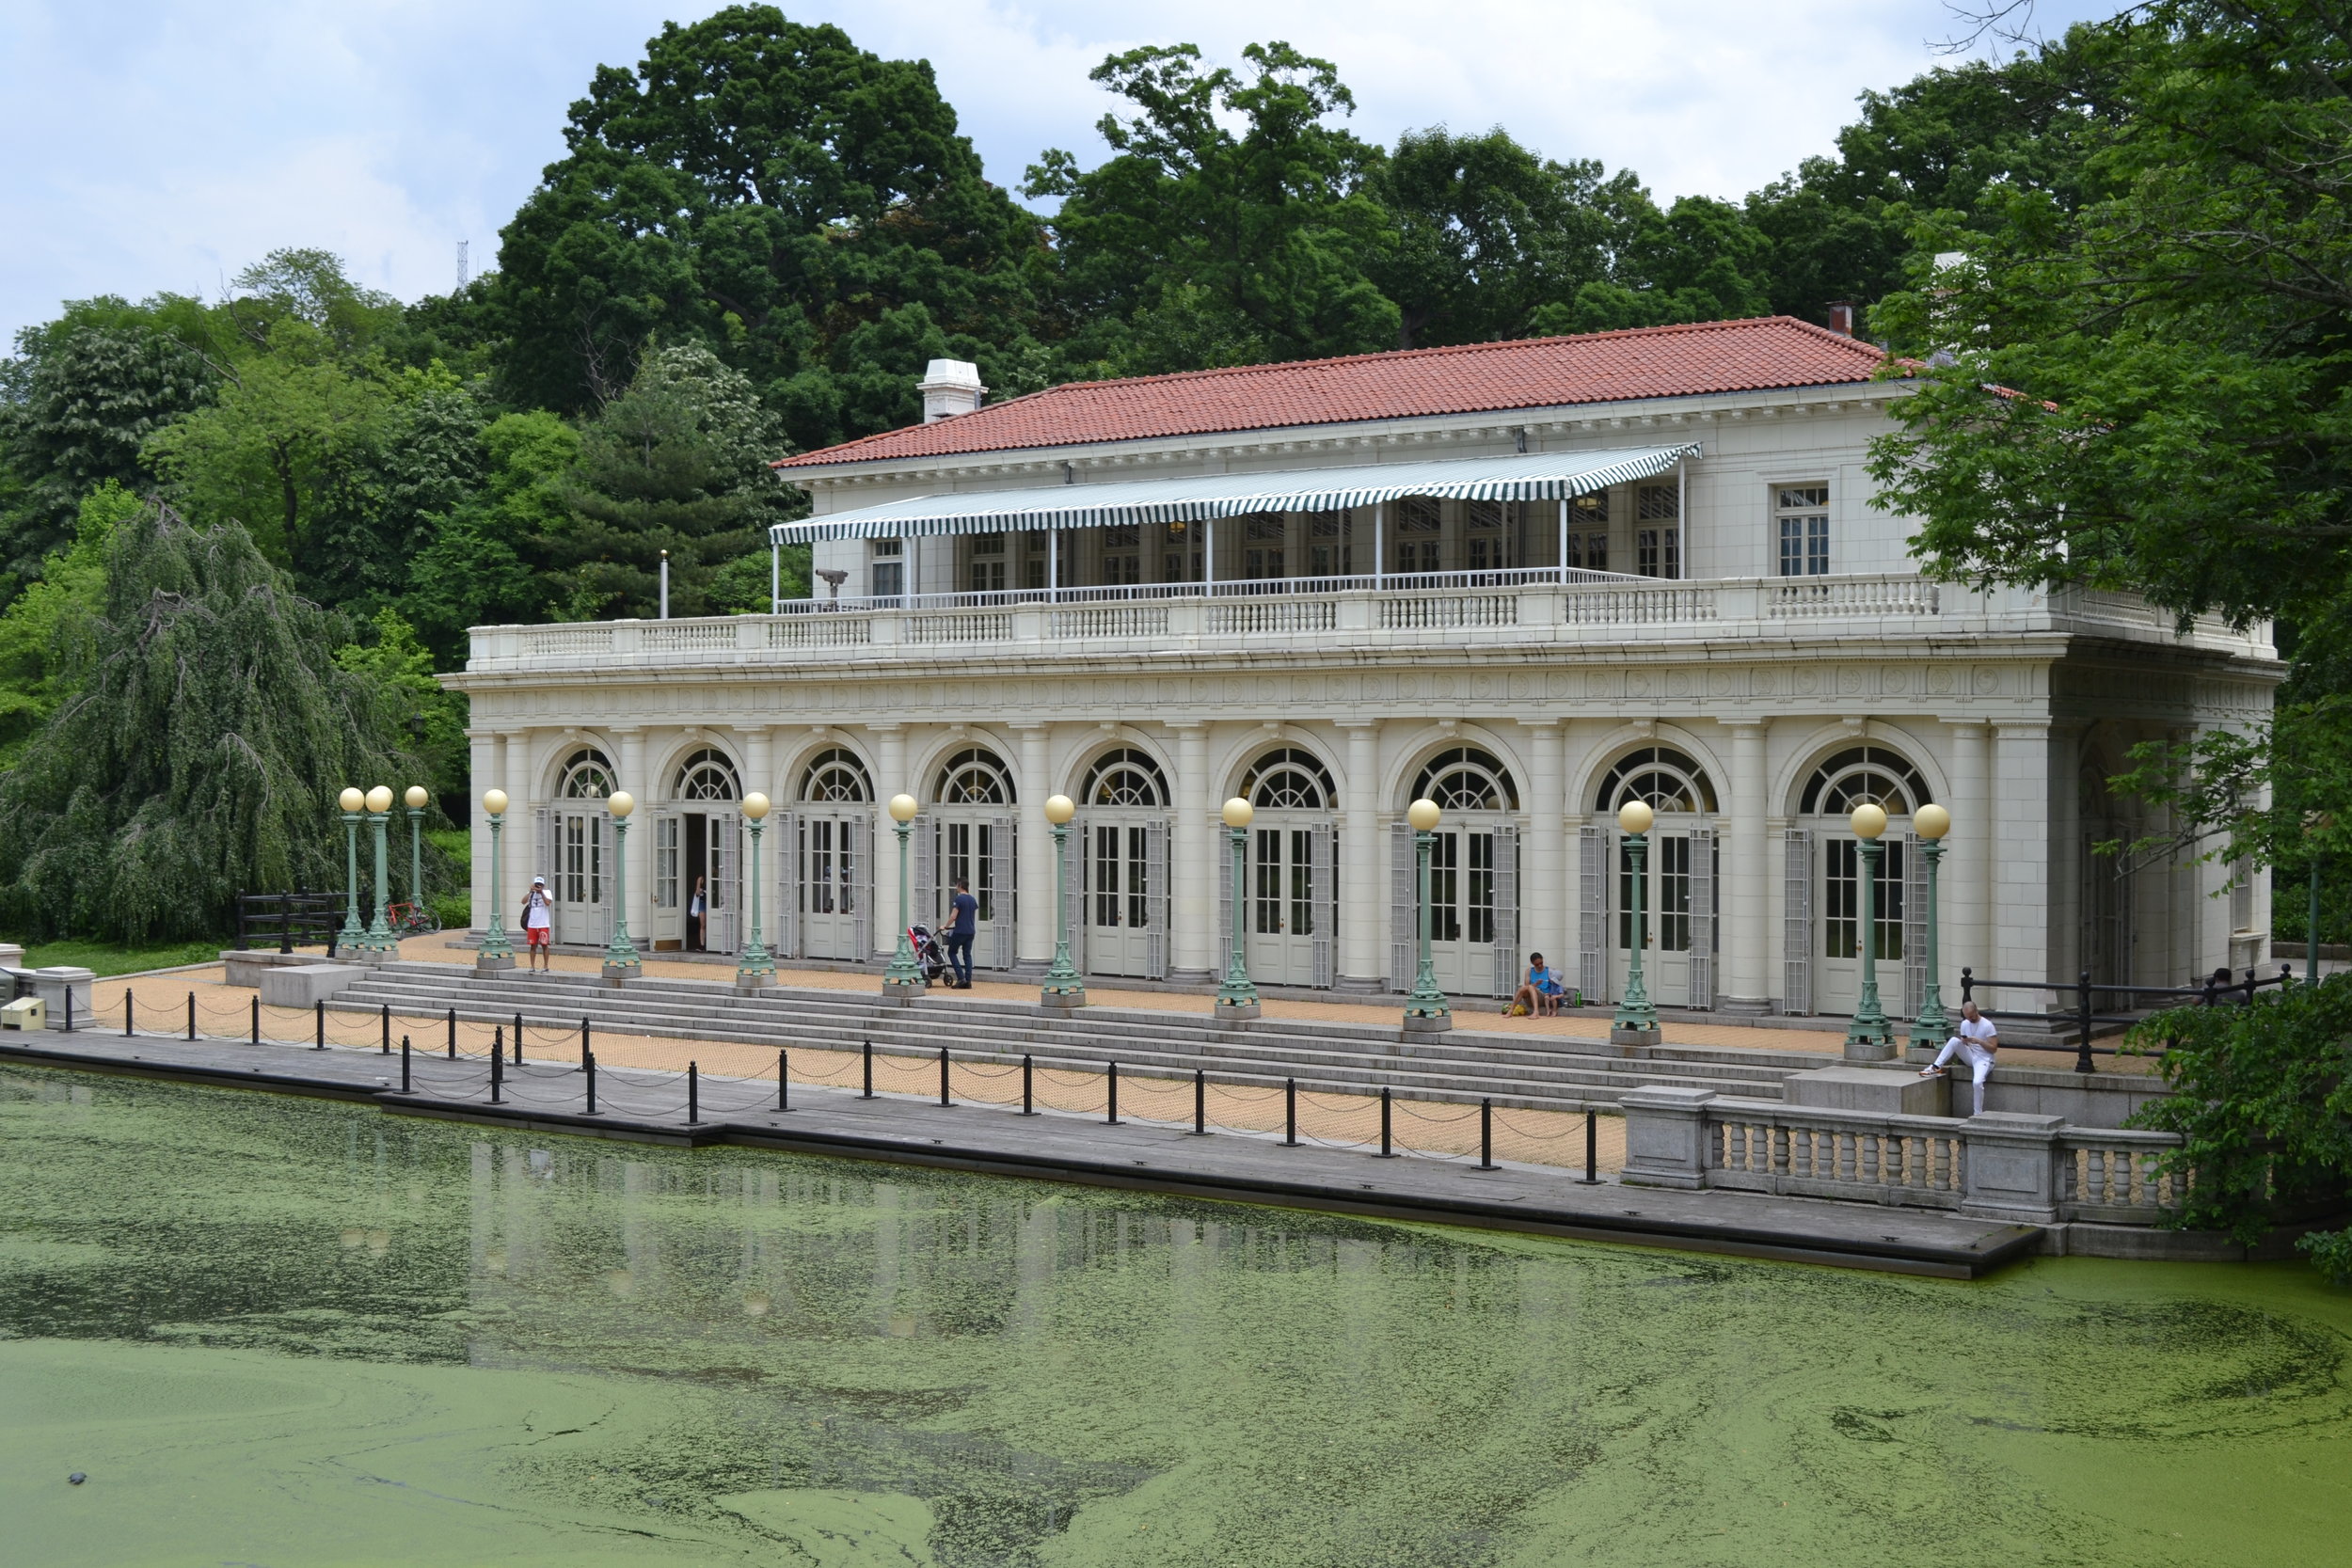 The Boathouse in Prospect Park